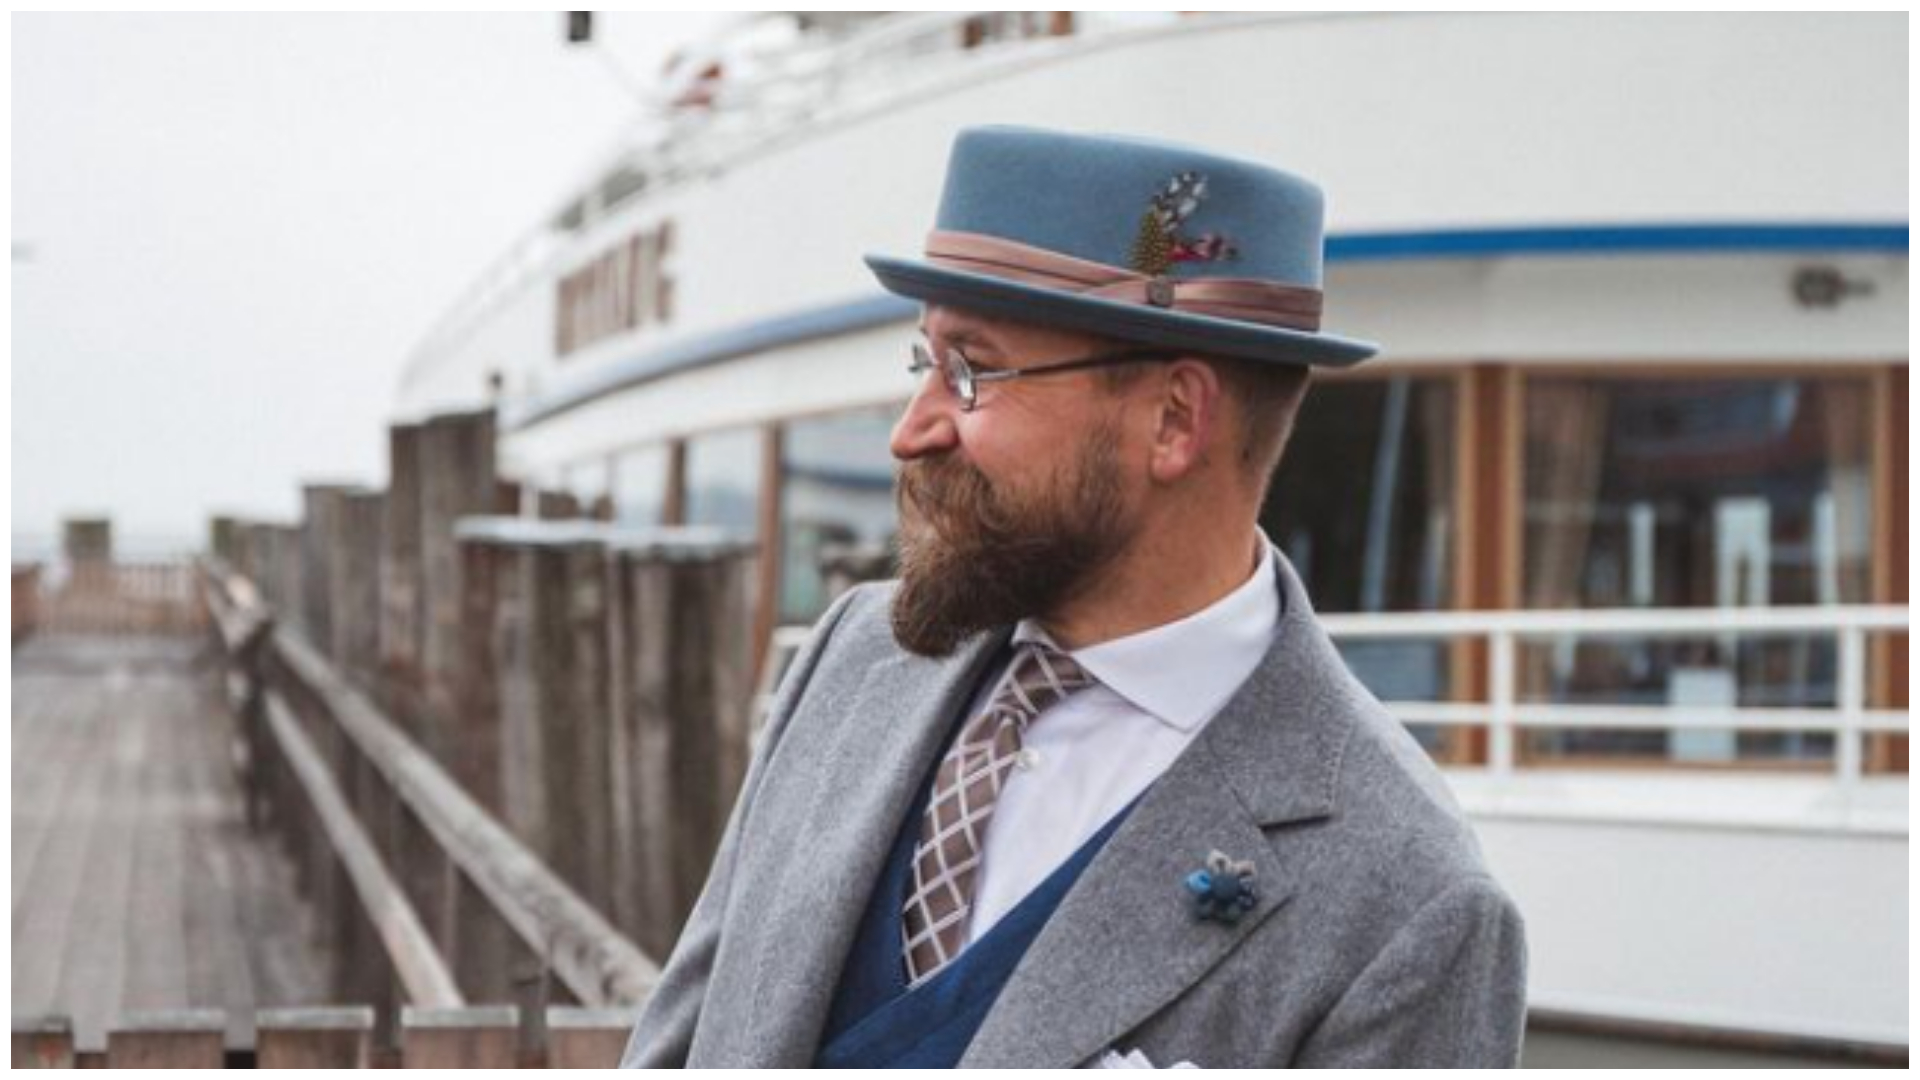 A man is standing next to yacht wearing a blue pork pie hat